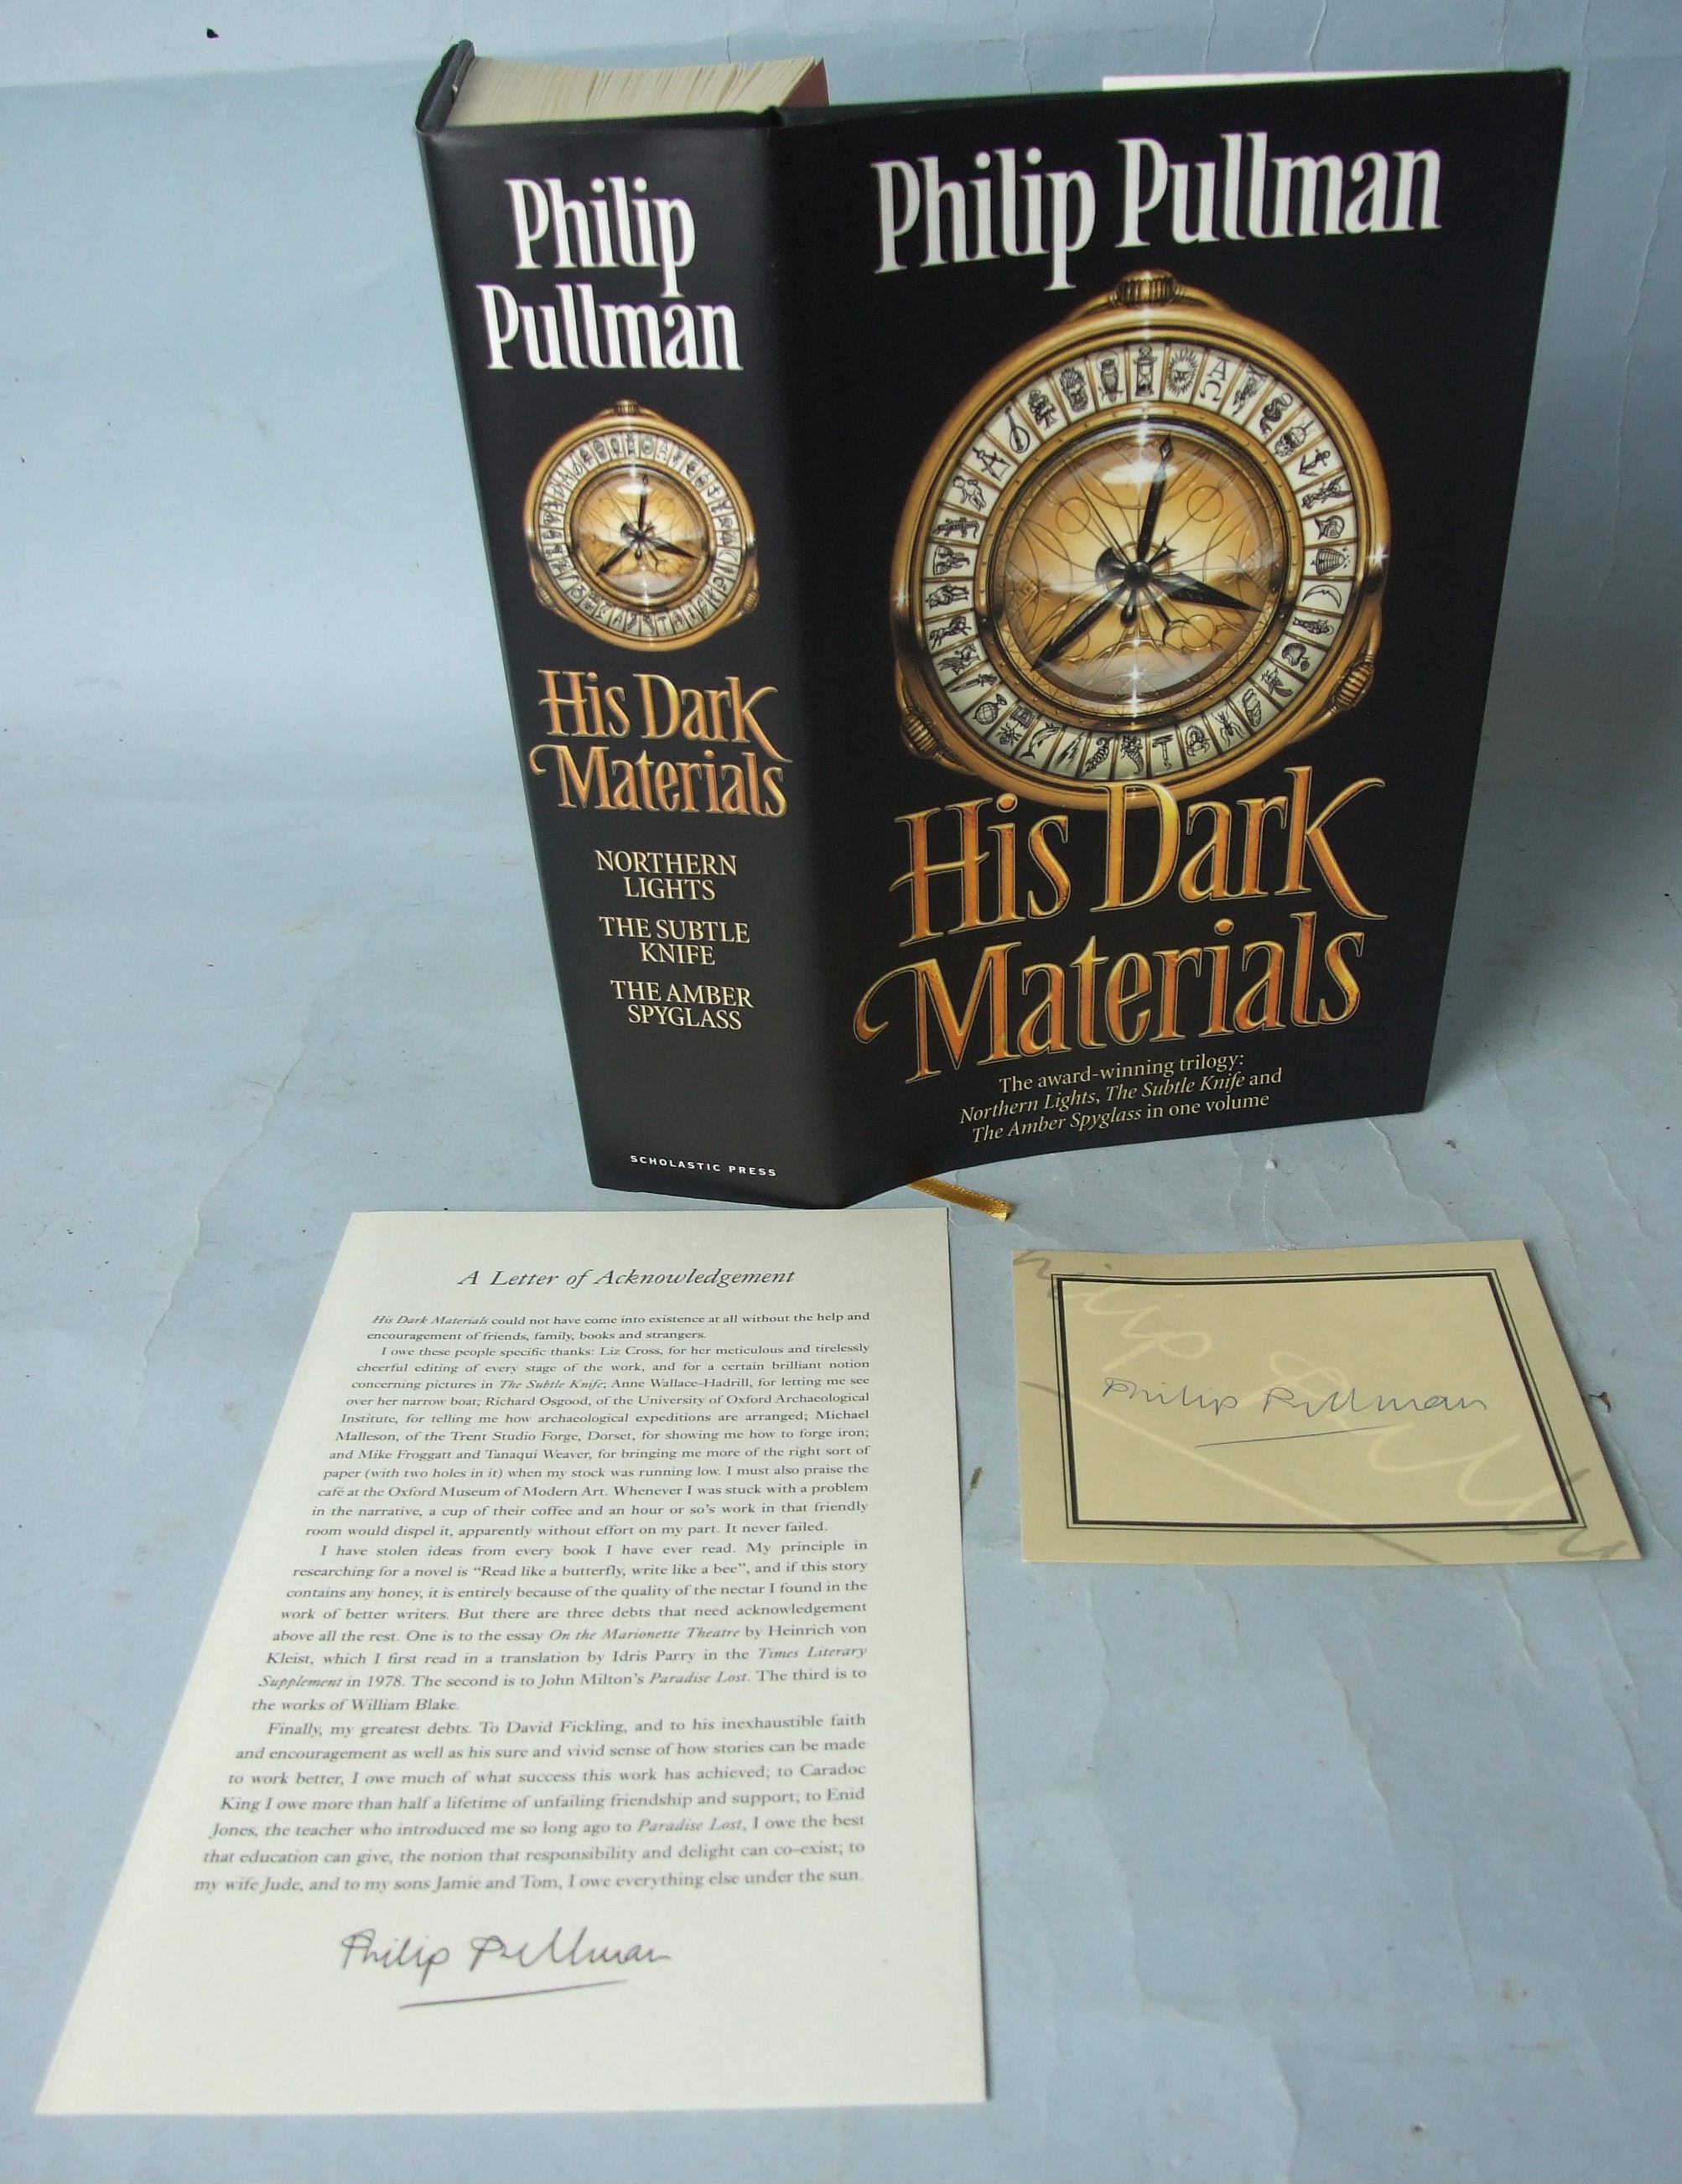 Pullman (Philip), His Dark Materials, with unattached signed book plate and letter of